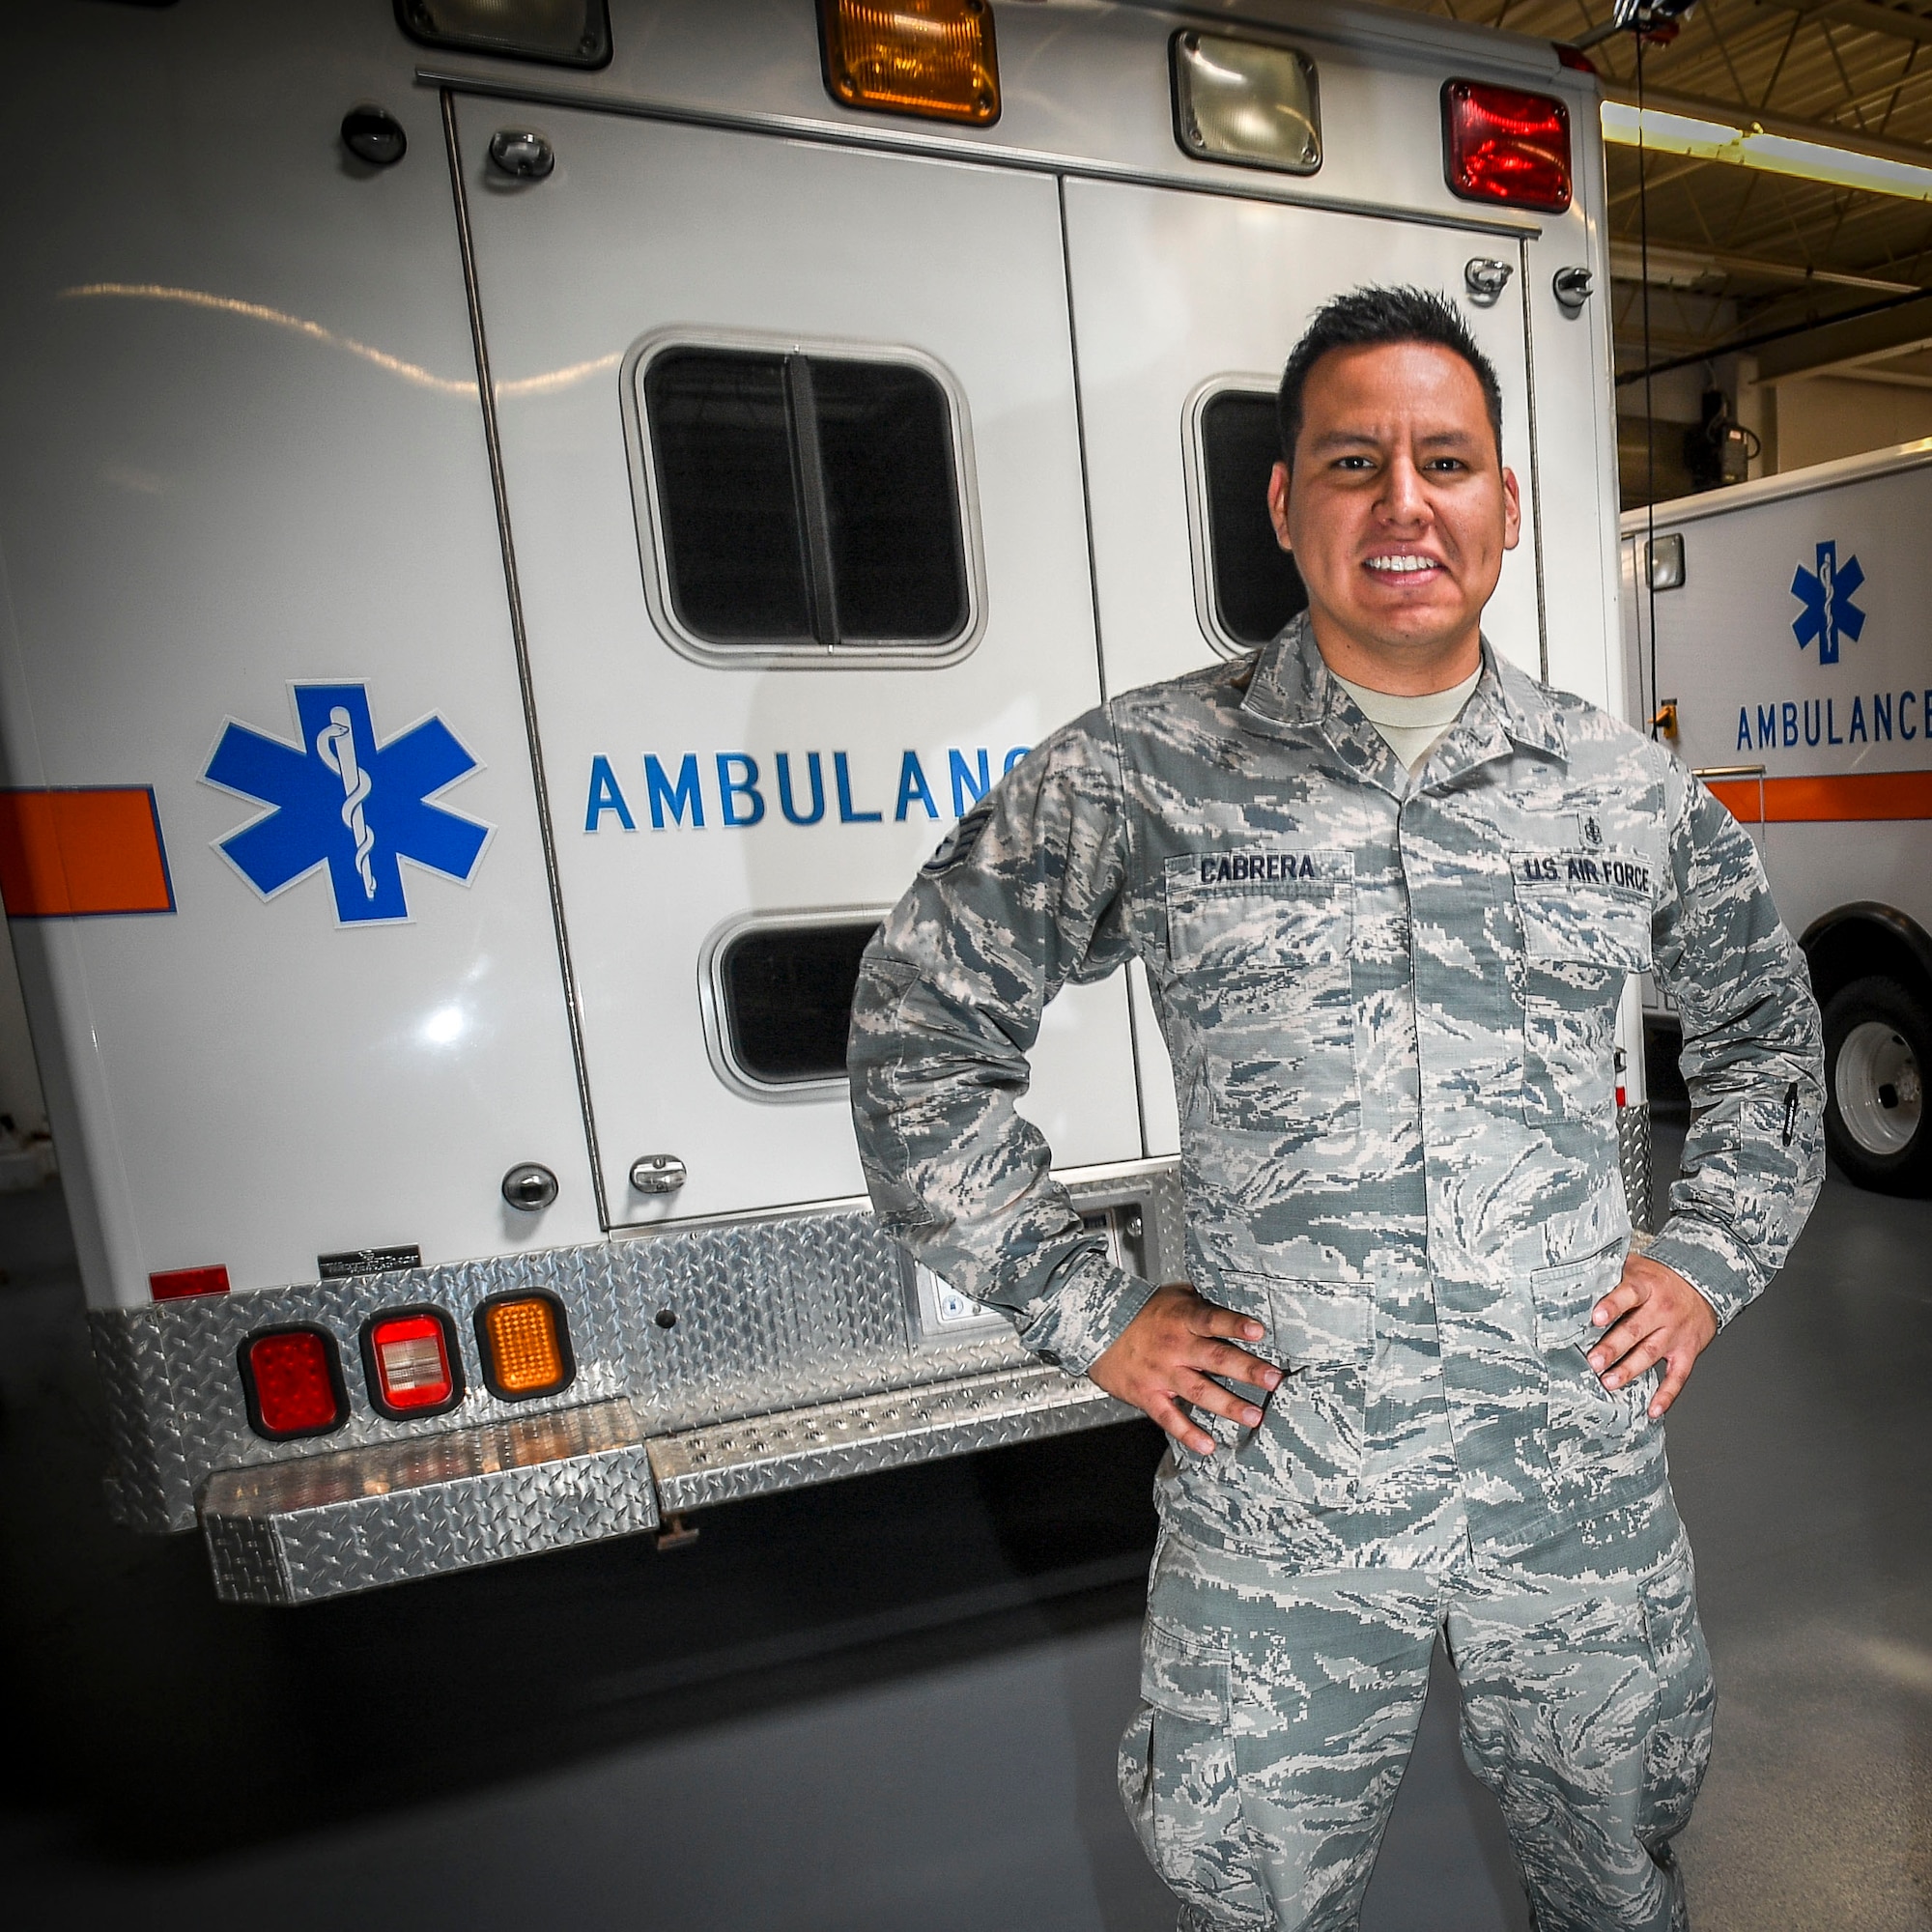 Staff Sgt. Ismael Cabrera, 75th Medical Support Squadron, NCOIC, Command Support Staff. Cabrera will depart Hill AFB in August to attend Commissioned Officer Training at Maxwell AFB, Alabama. (U.S. Air Force photo by Paul Holcomb) 